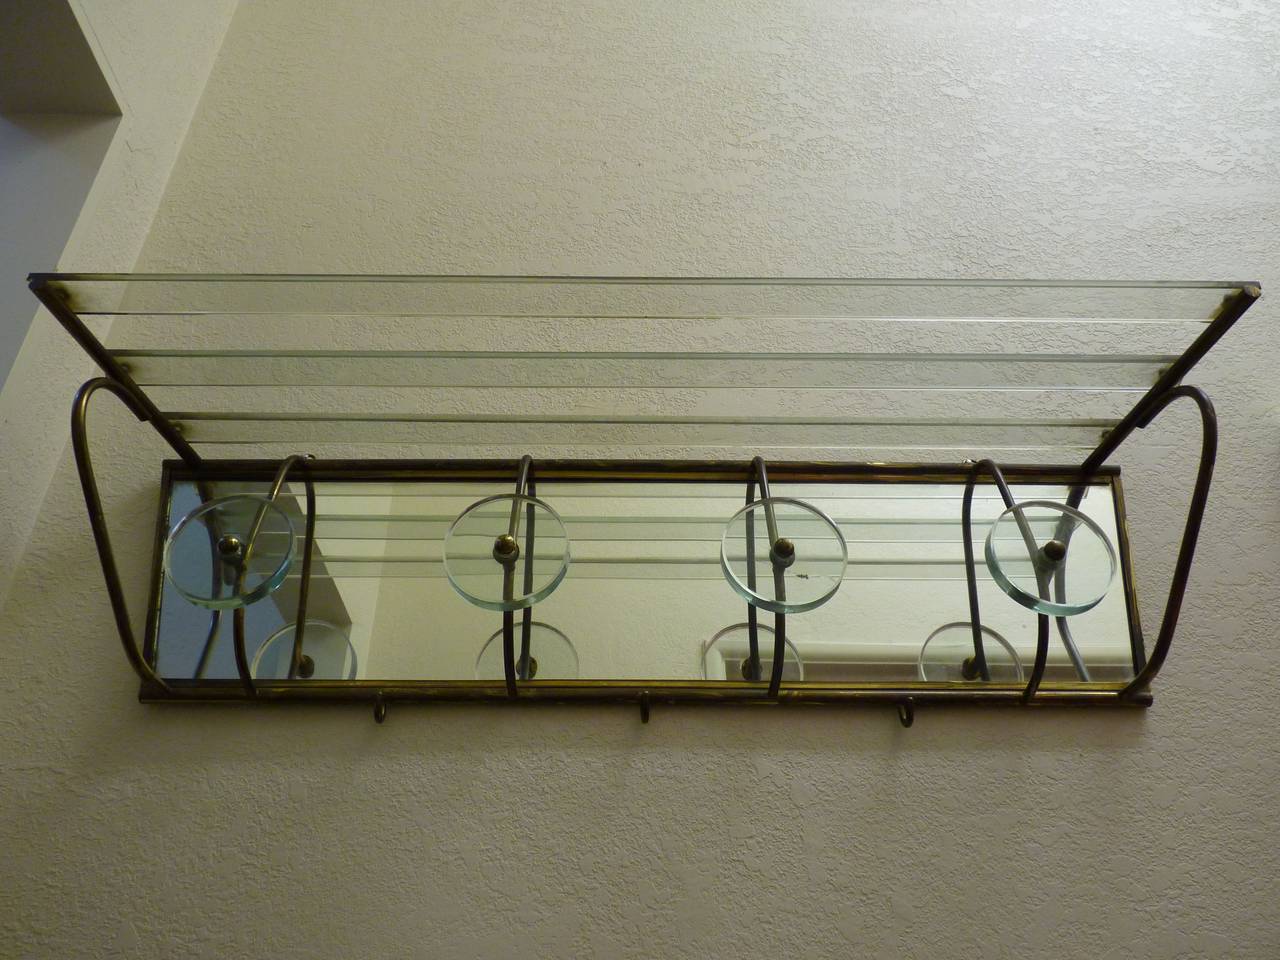 Italian coat rack valet in brass and glass from Carlo Mollino's Lutrario Dance Hall in Turino, Italy. 
Provenance on request.